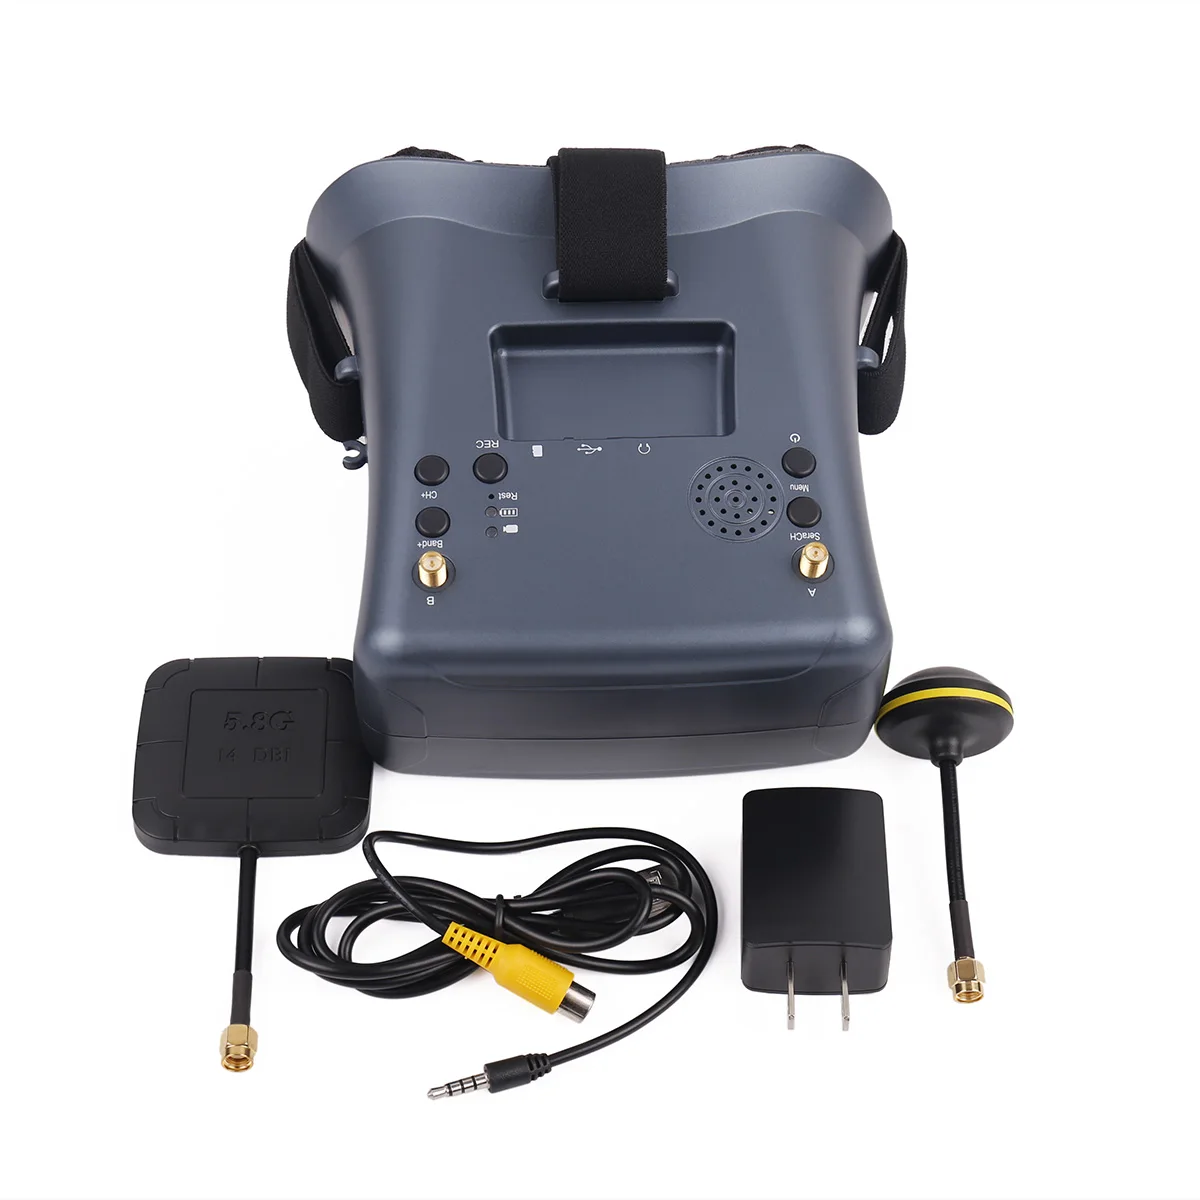 

LS-800D FPV Goggles 5.8G 40CH 5inch 4.3inch HD DVR Video Headset Kit for RC Racing Drone Quadcopter Multi-copter Transmission